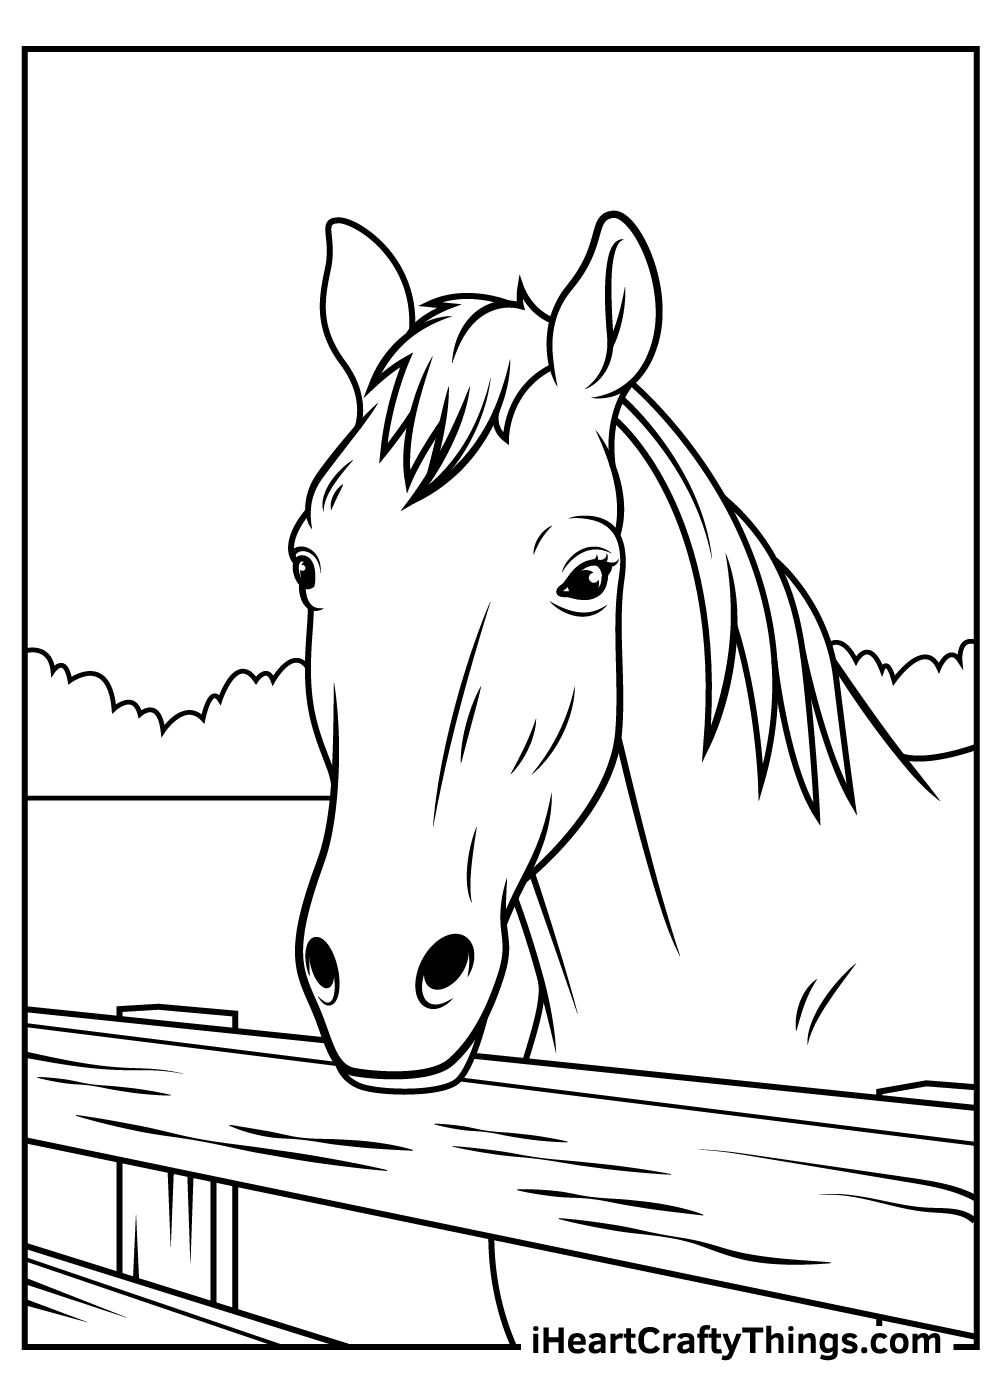 Realistic horse coloring pages horse coloring pages horse coloring horses